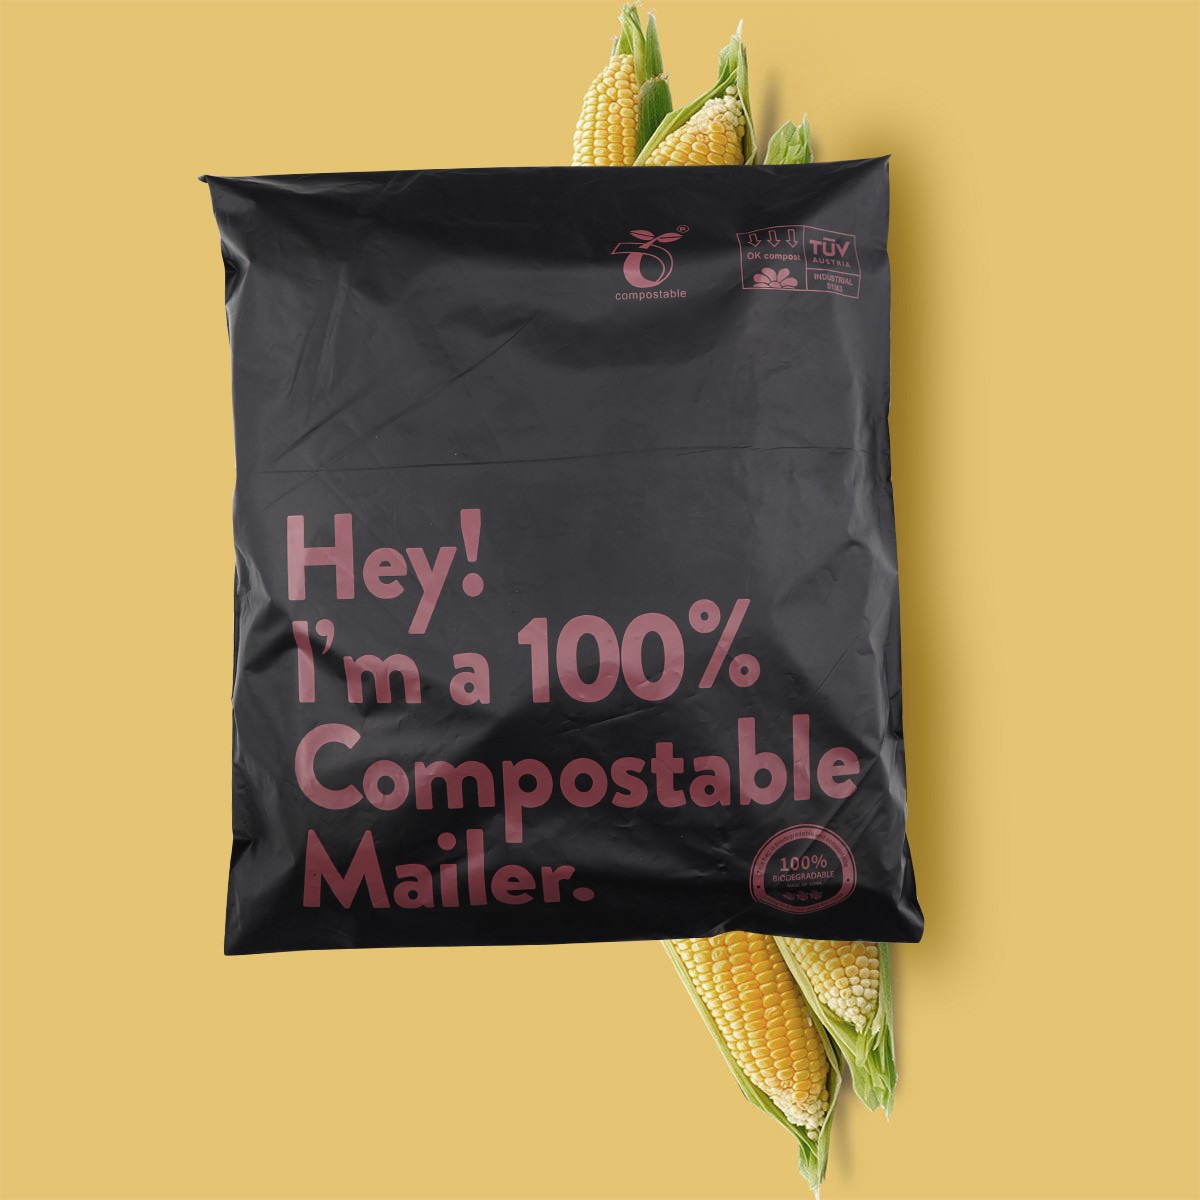 What Is the Difference Between a Compostable Packaging Bag and a Fully Compostable Packaging Bag